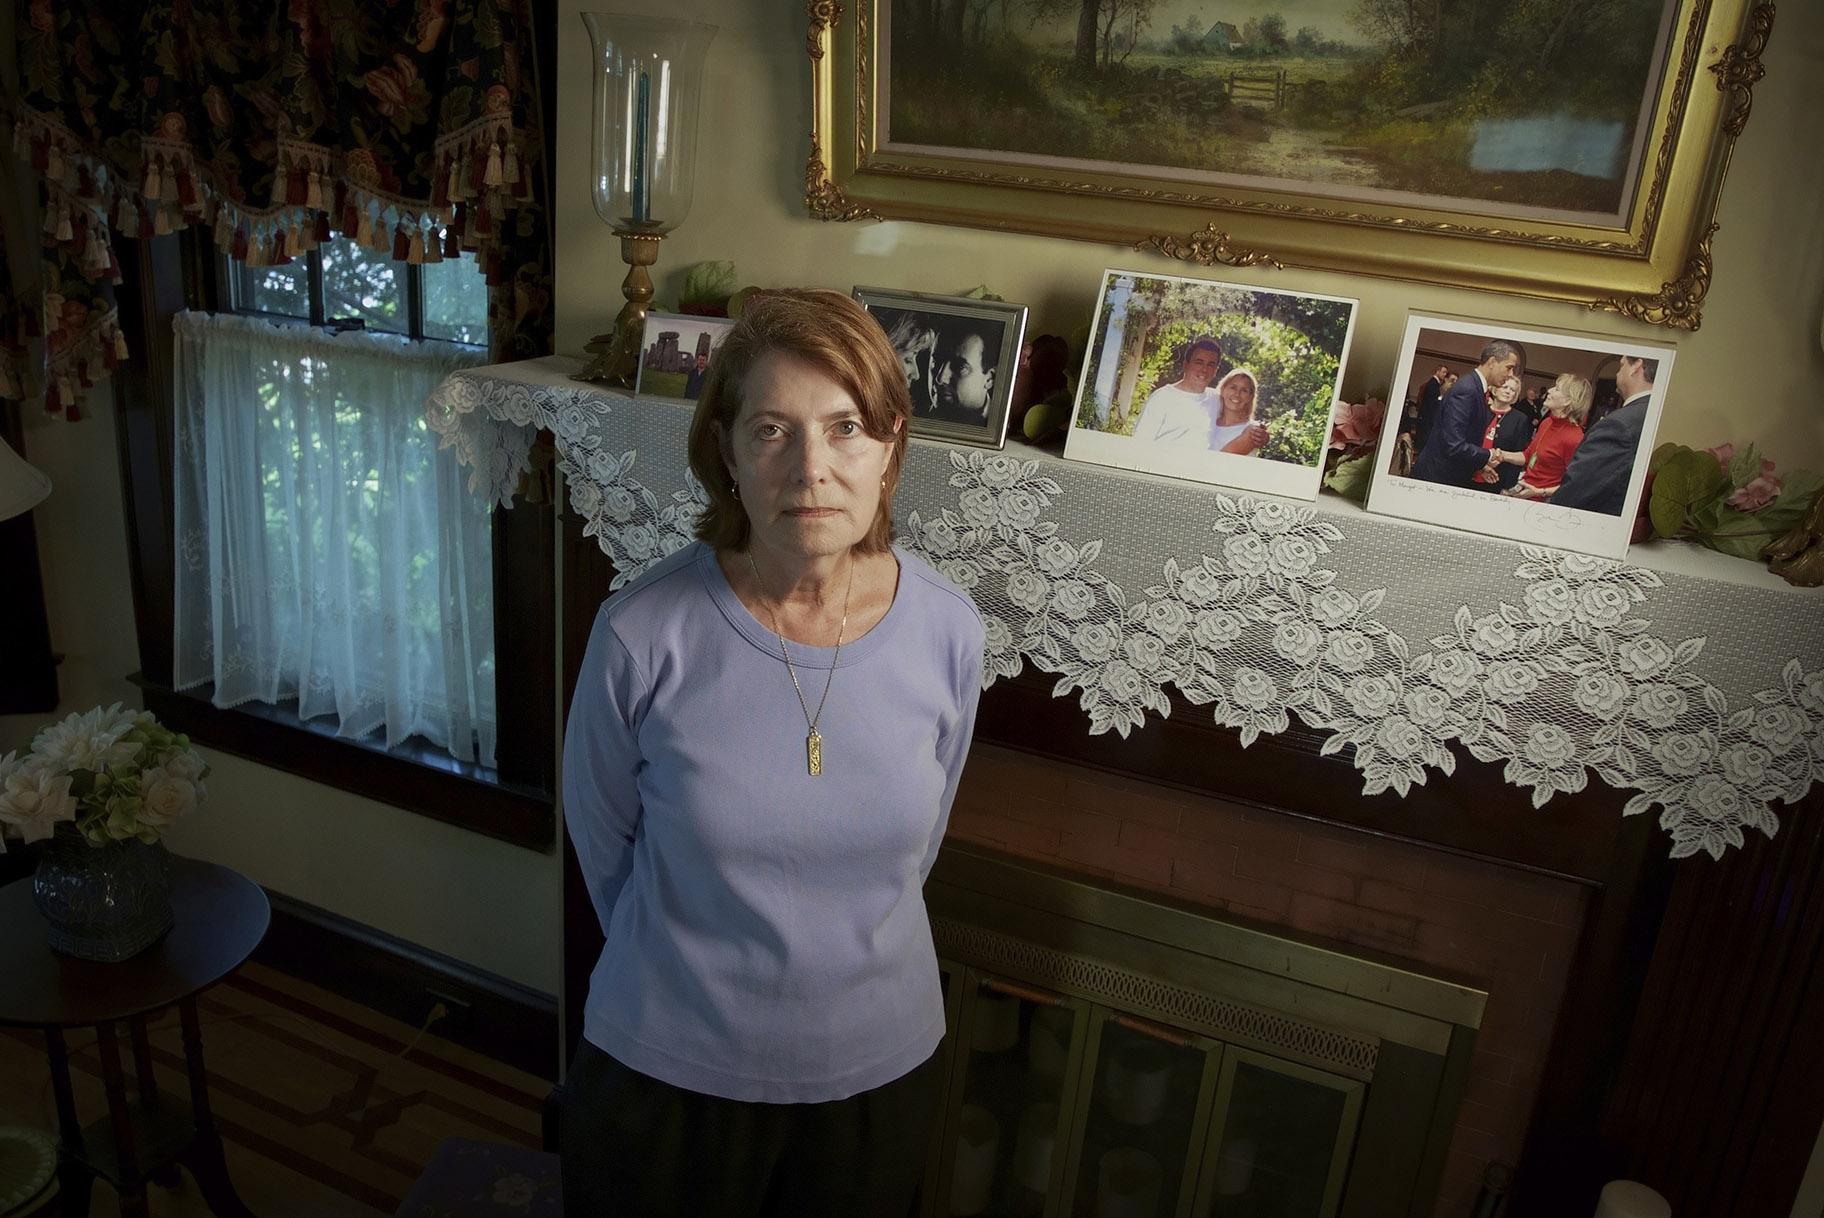 Margot Eckert stands by a display of pictures of her brother-in-law Sean Rooney and sister Beverly Eckert at her home, Thursday, July 15, 2021, in Springfield, Mass. (AP Photo / Robert Bumsted)